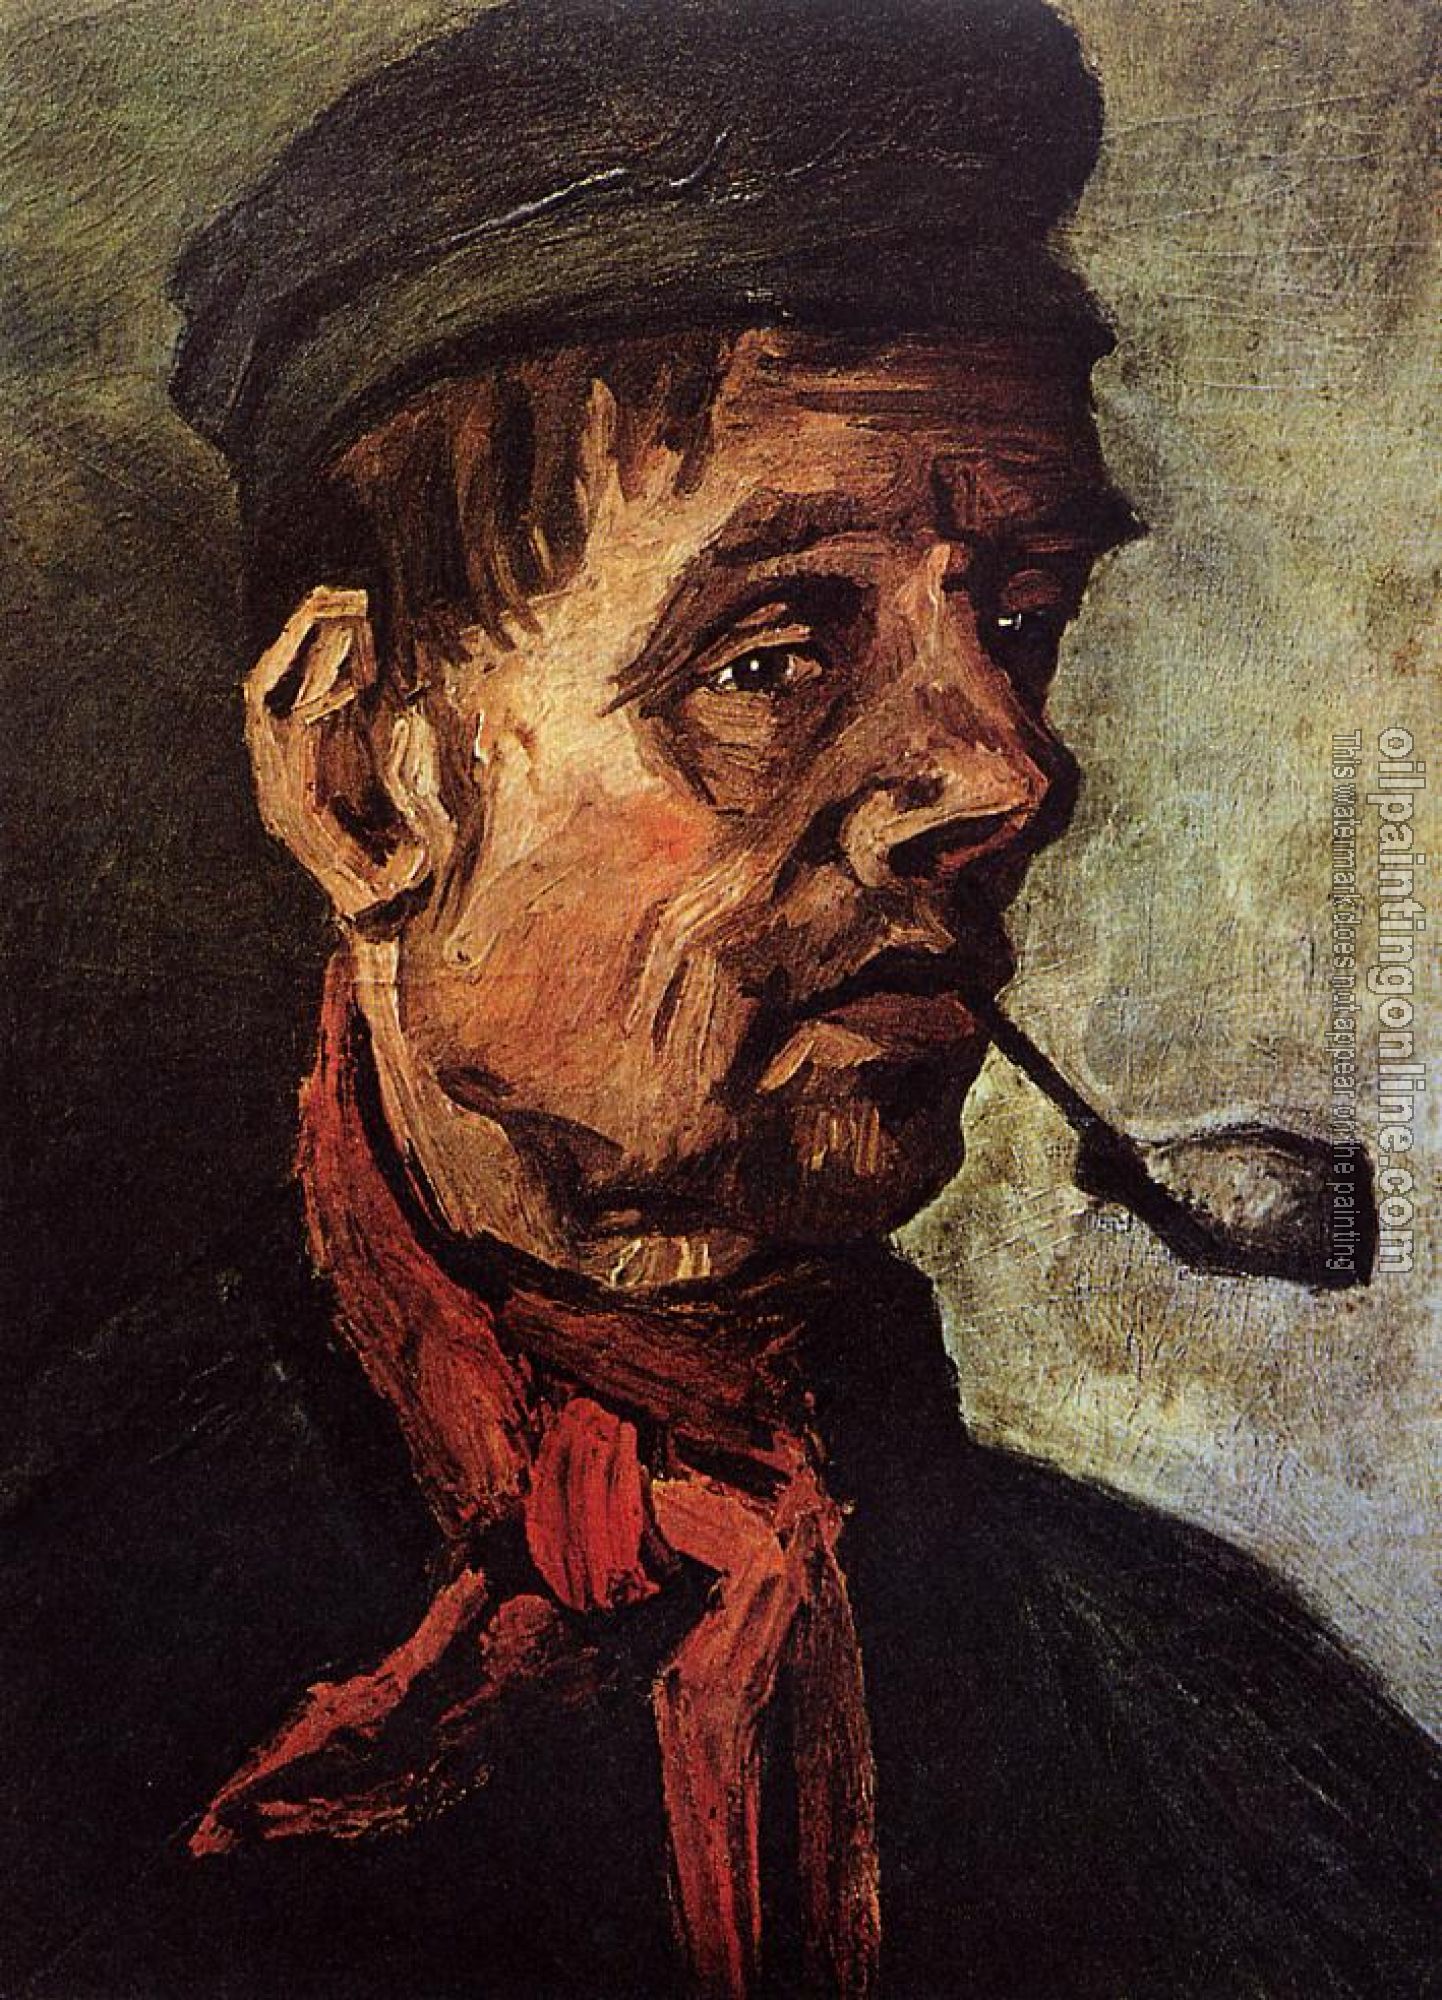 Gogh, Vincent van - Head of a Peasant with a Pipe